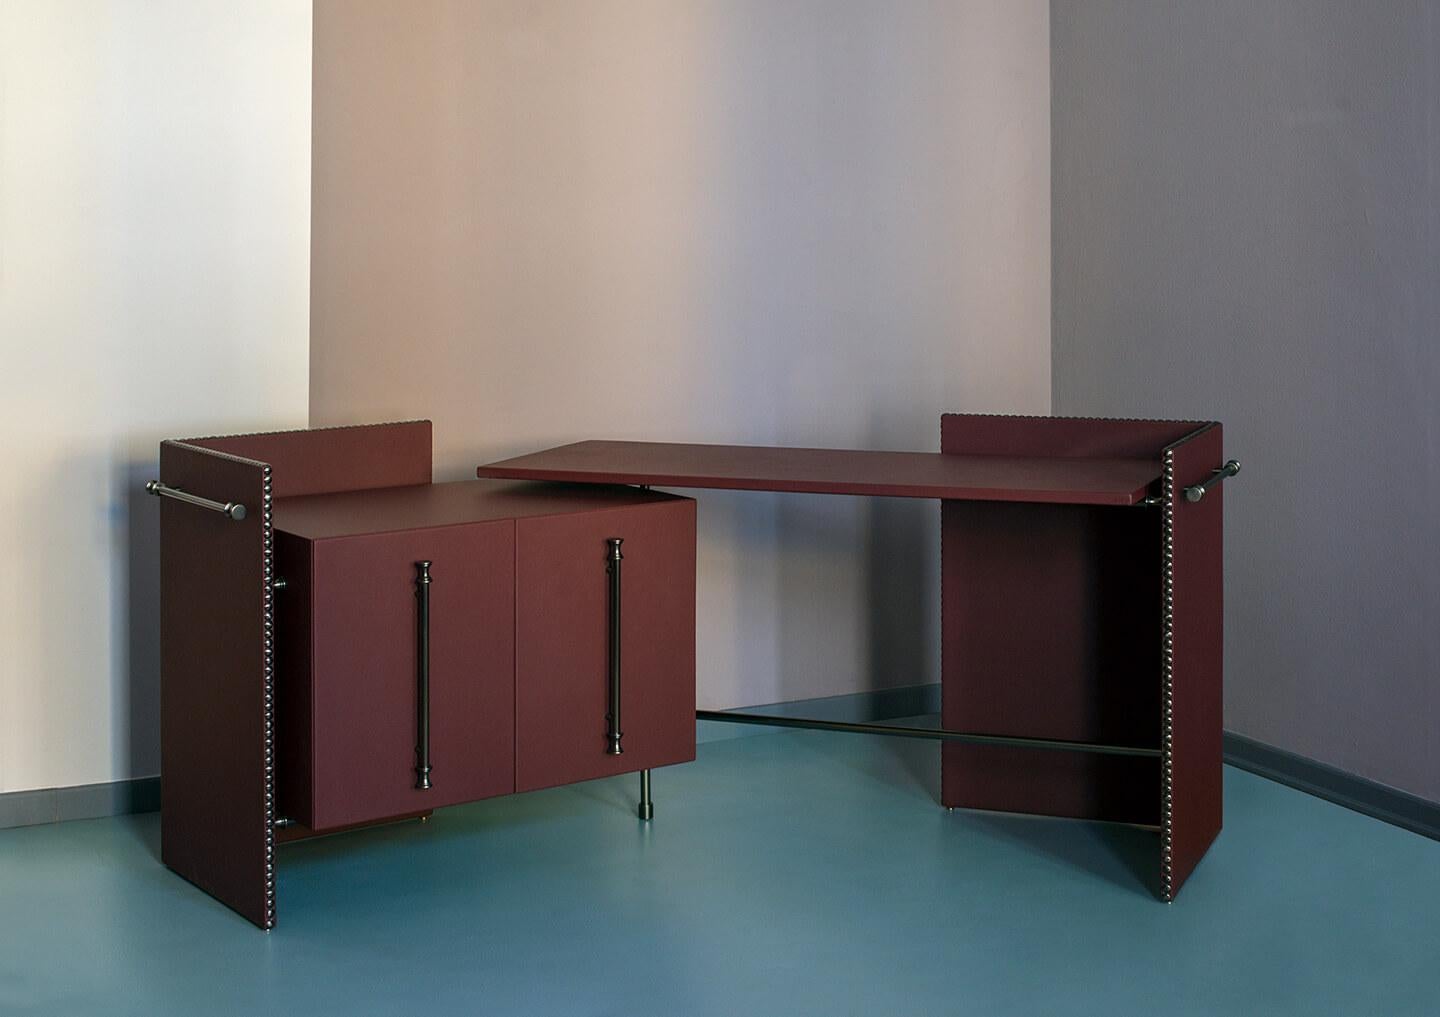 Christopher desk by Marta Sala Editions
Dimensions: W 210 x D 75 x H 84 cm
Materials: Leather, Brass, Wood
Variations of Material and Dimension are available.

Each piece of furniture is the result of a creative dialogue. With her very specific